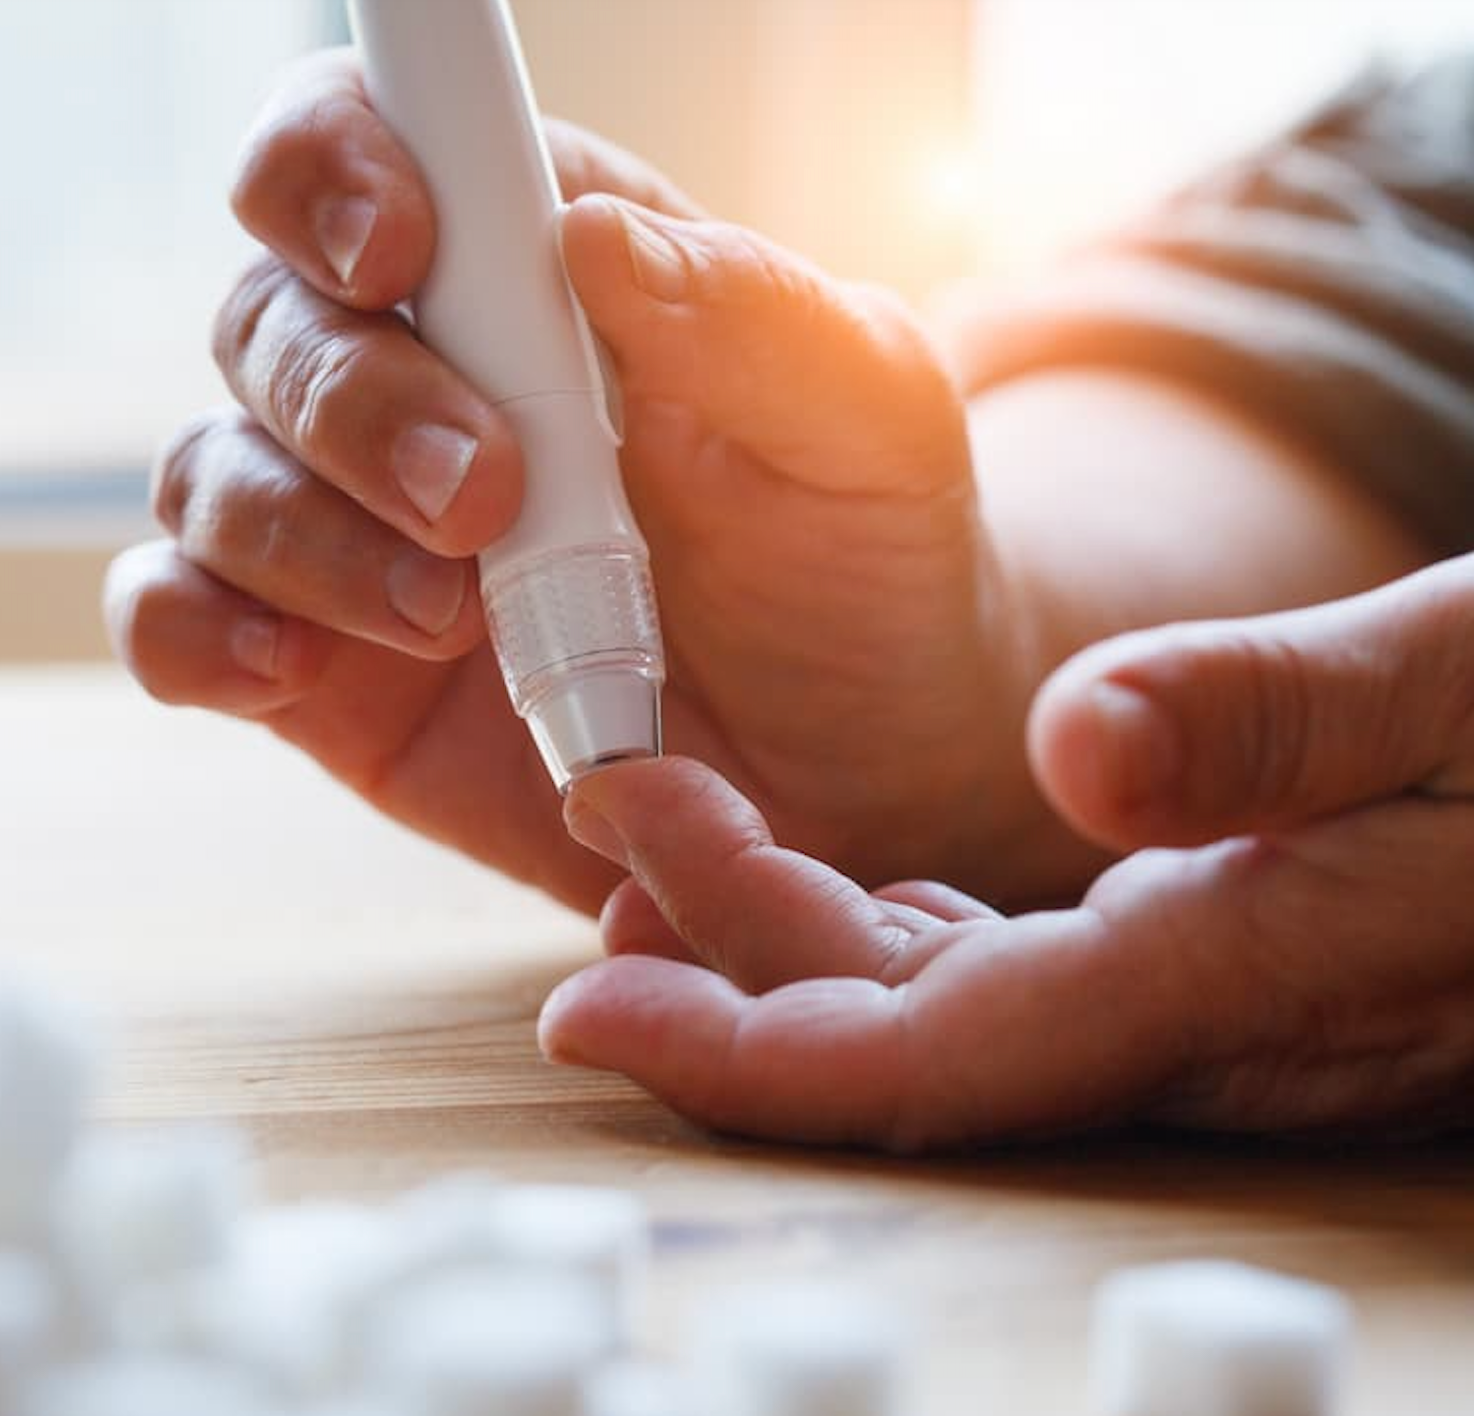 Tofacitinib Improves Insulin Resistance in Patients with RA, Type 2 Diabetes 